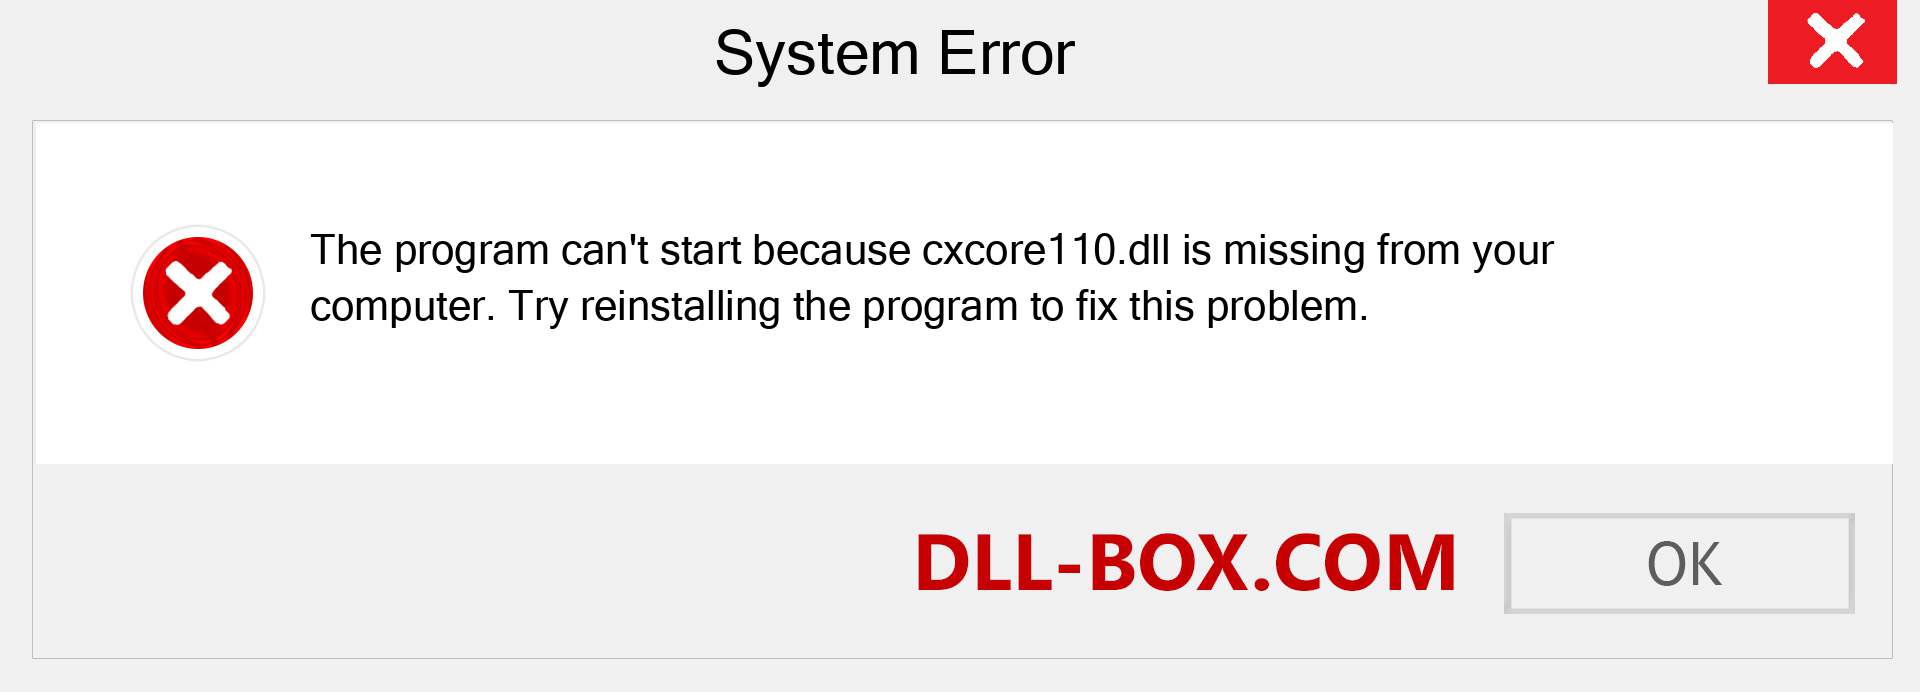  cxcore110.dll file is missing?. Download for Windows 7, 8, 10 - Fix  cxcore110 dll Missing Error on Windows, photos, images